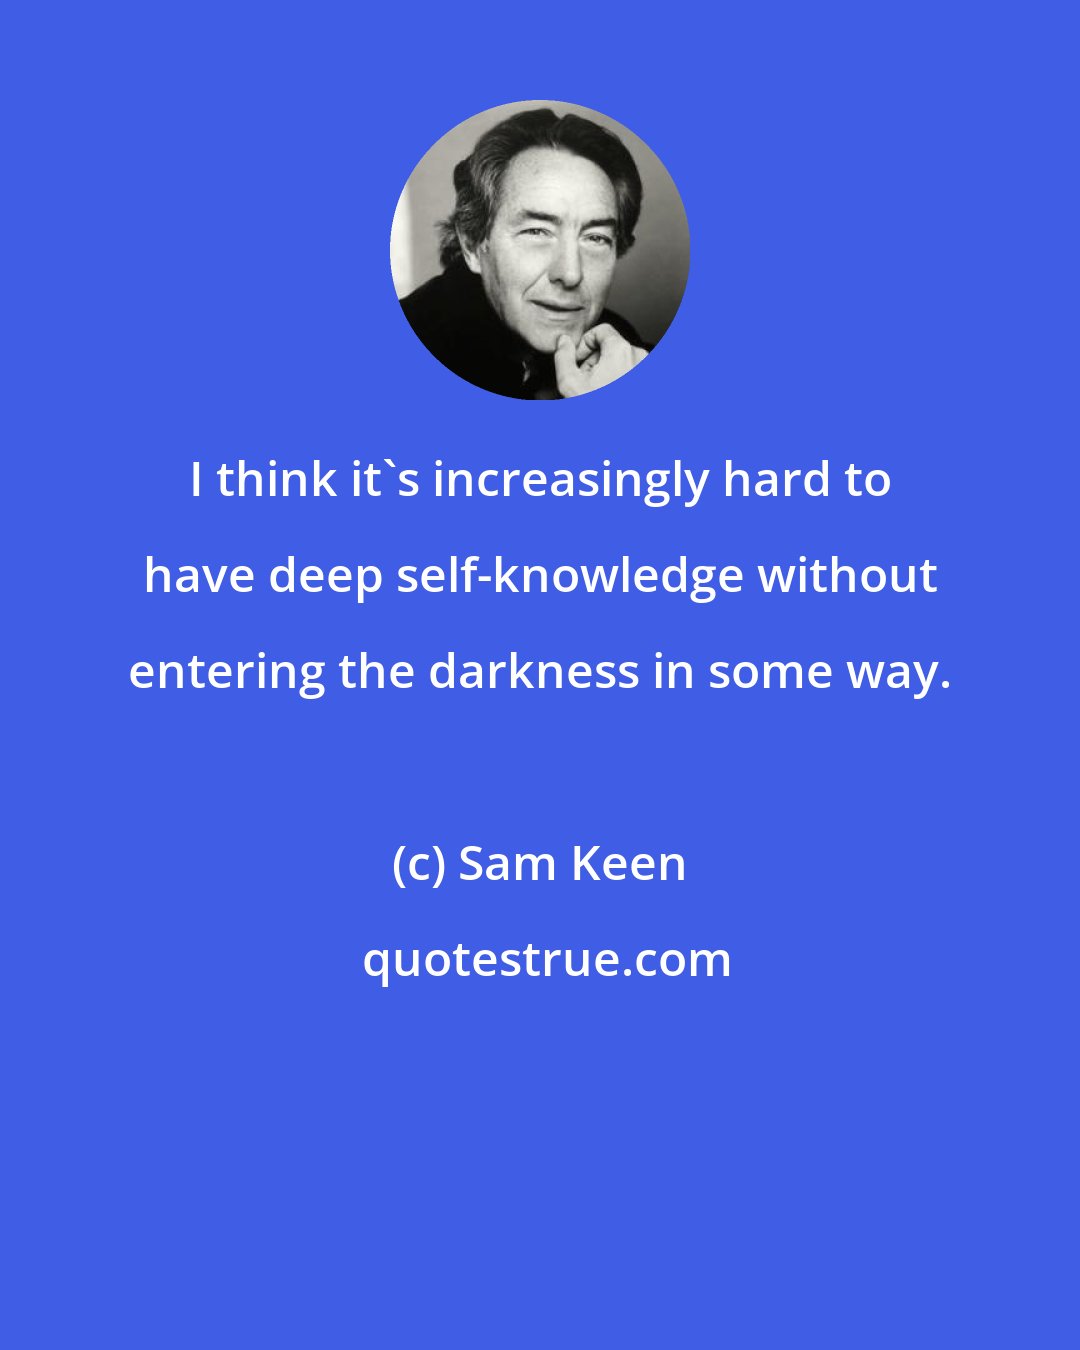 Sam Keen: I think it's increasingly hard to have deep self-knowledge without entering the darkness in some way.